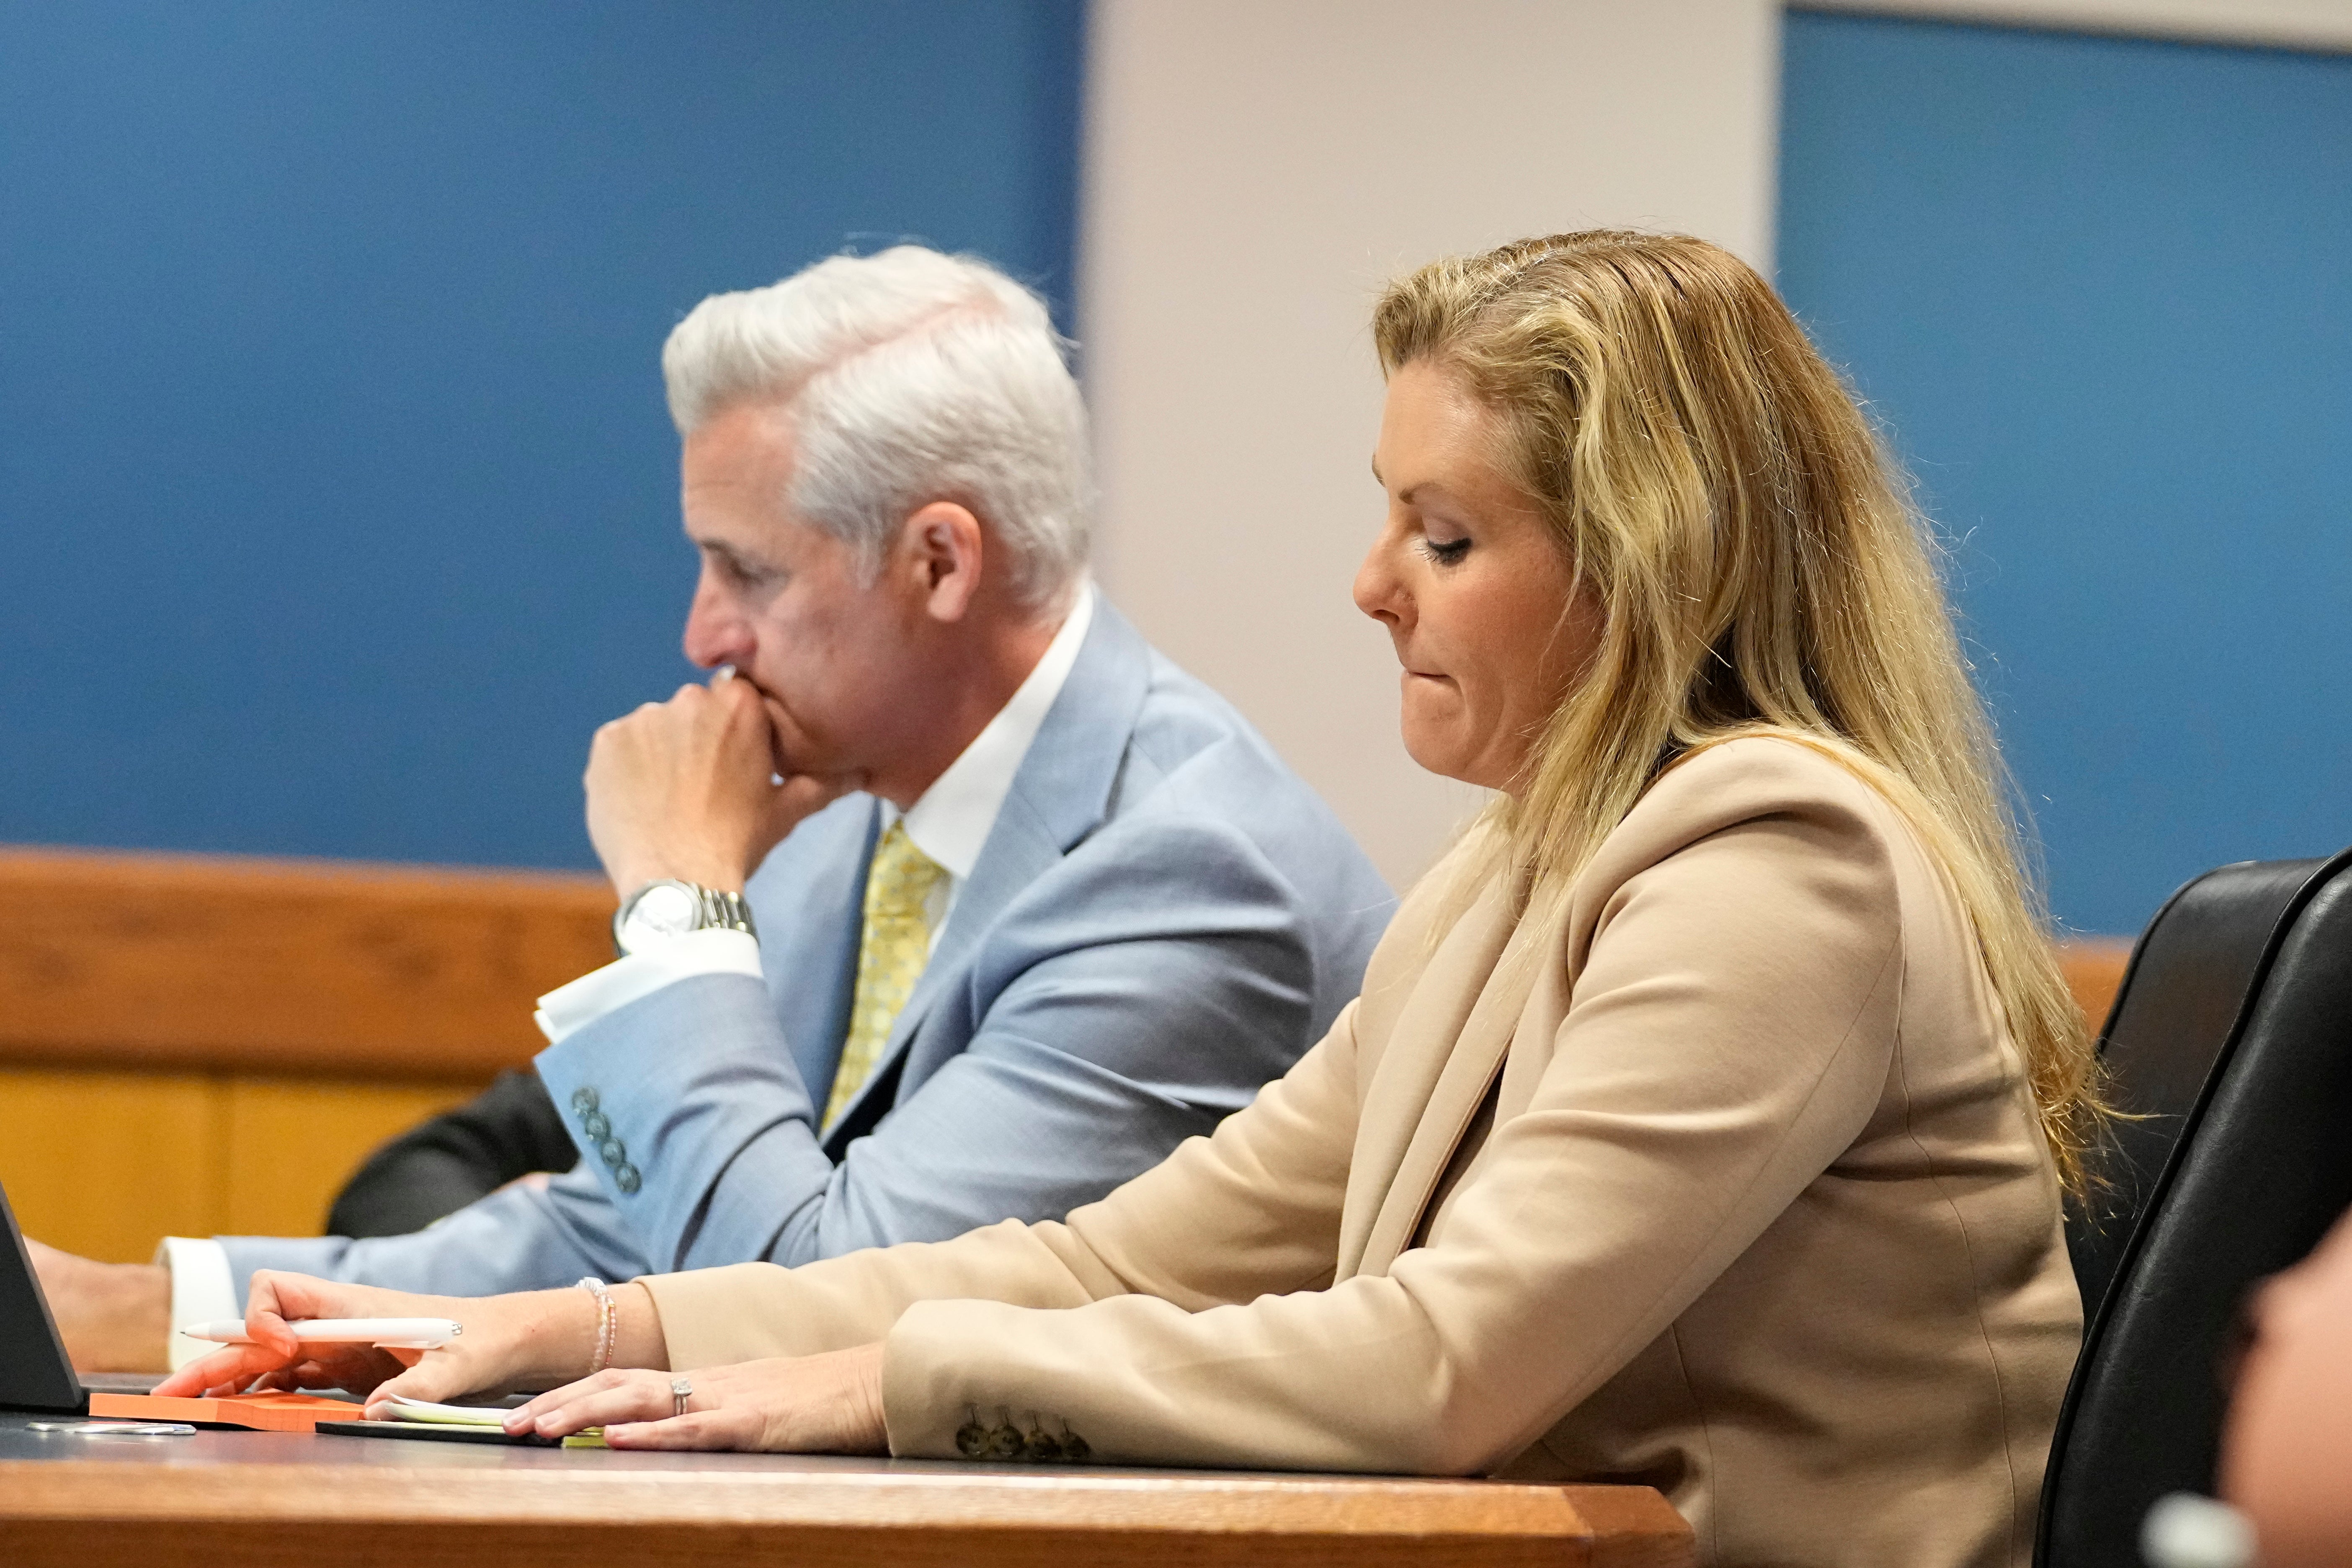 Ashleigh Merchant, right, an attorney for Trump co-defendant Mike Roman, and her husband and law partner John Merchant, left, attend a hearing at the Fulton County courthouse on 27 February